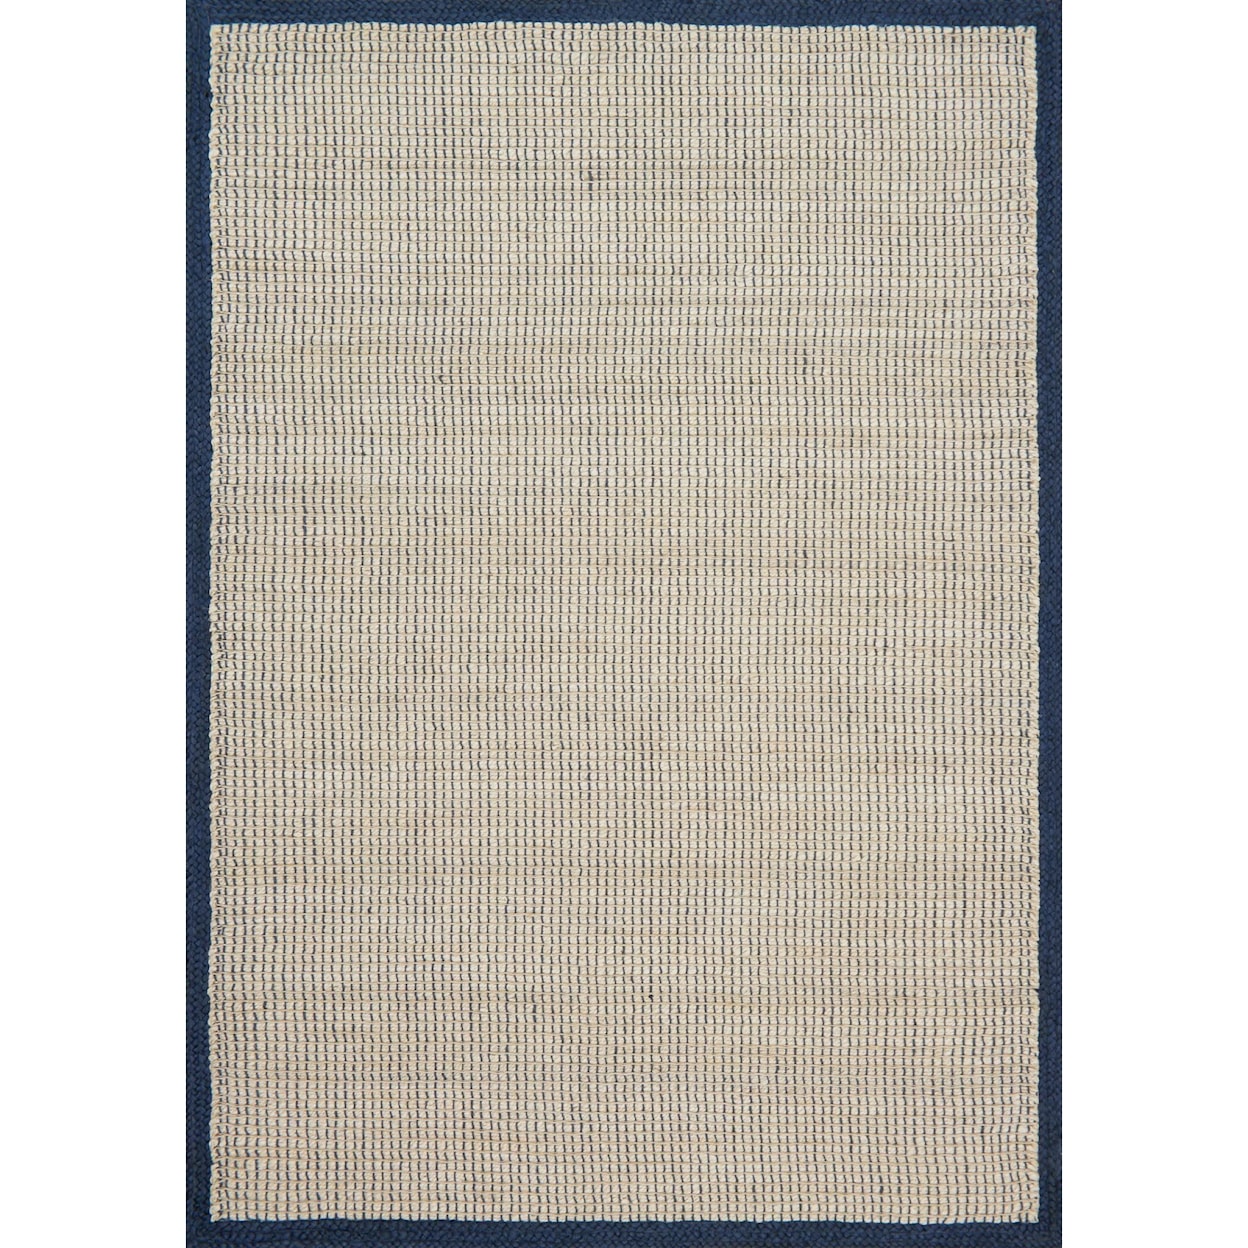 Magnolia Home by Joanna Gaines for Loloi Sydney 1' 0" x 1' 0" Rectangle Rug